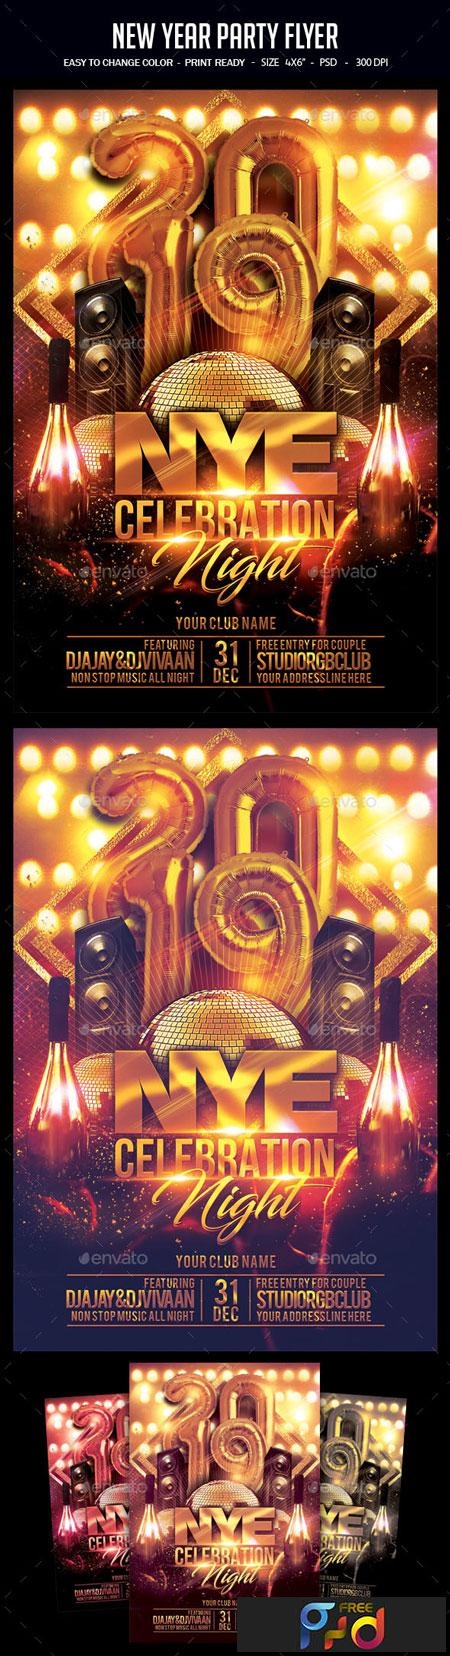 FreePsdVn.com 1901119 TEMPLATE new year party flyer 22827145